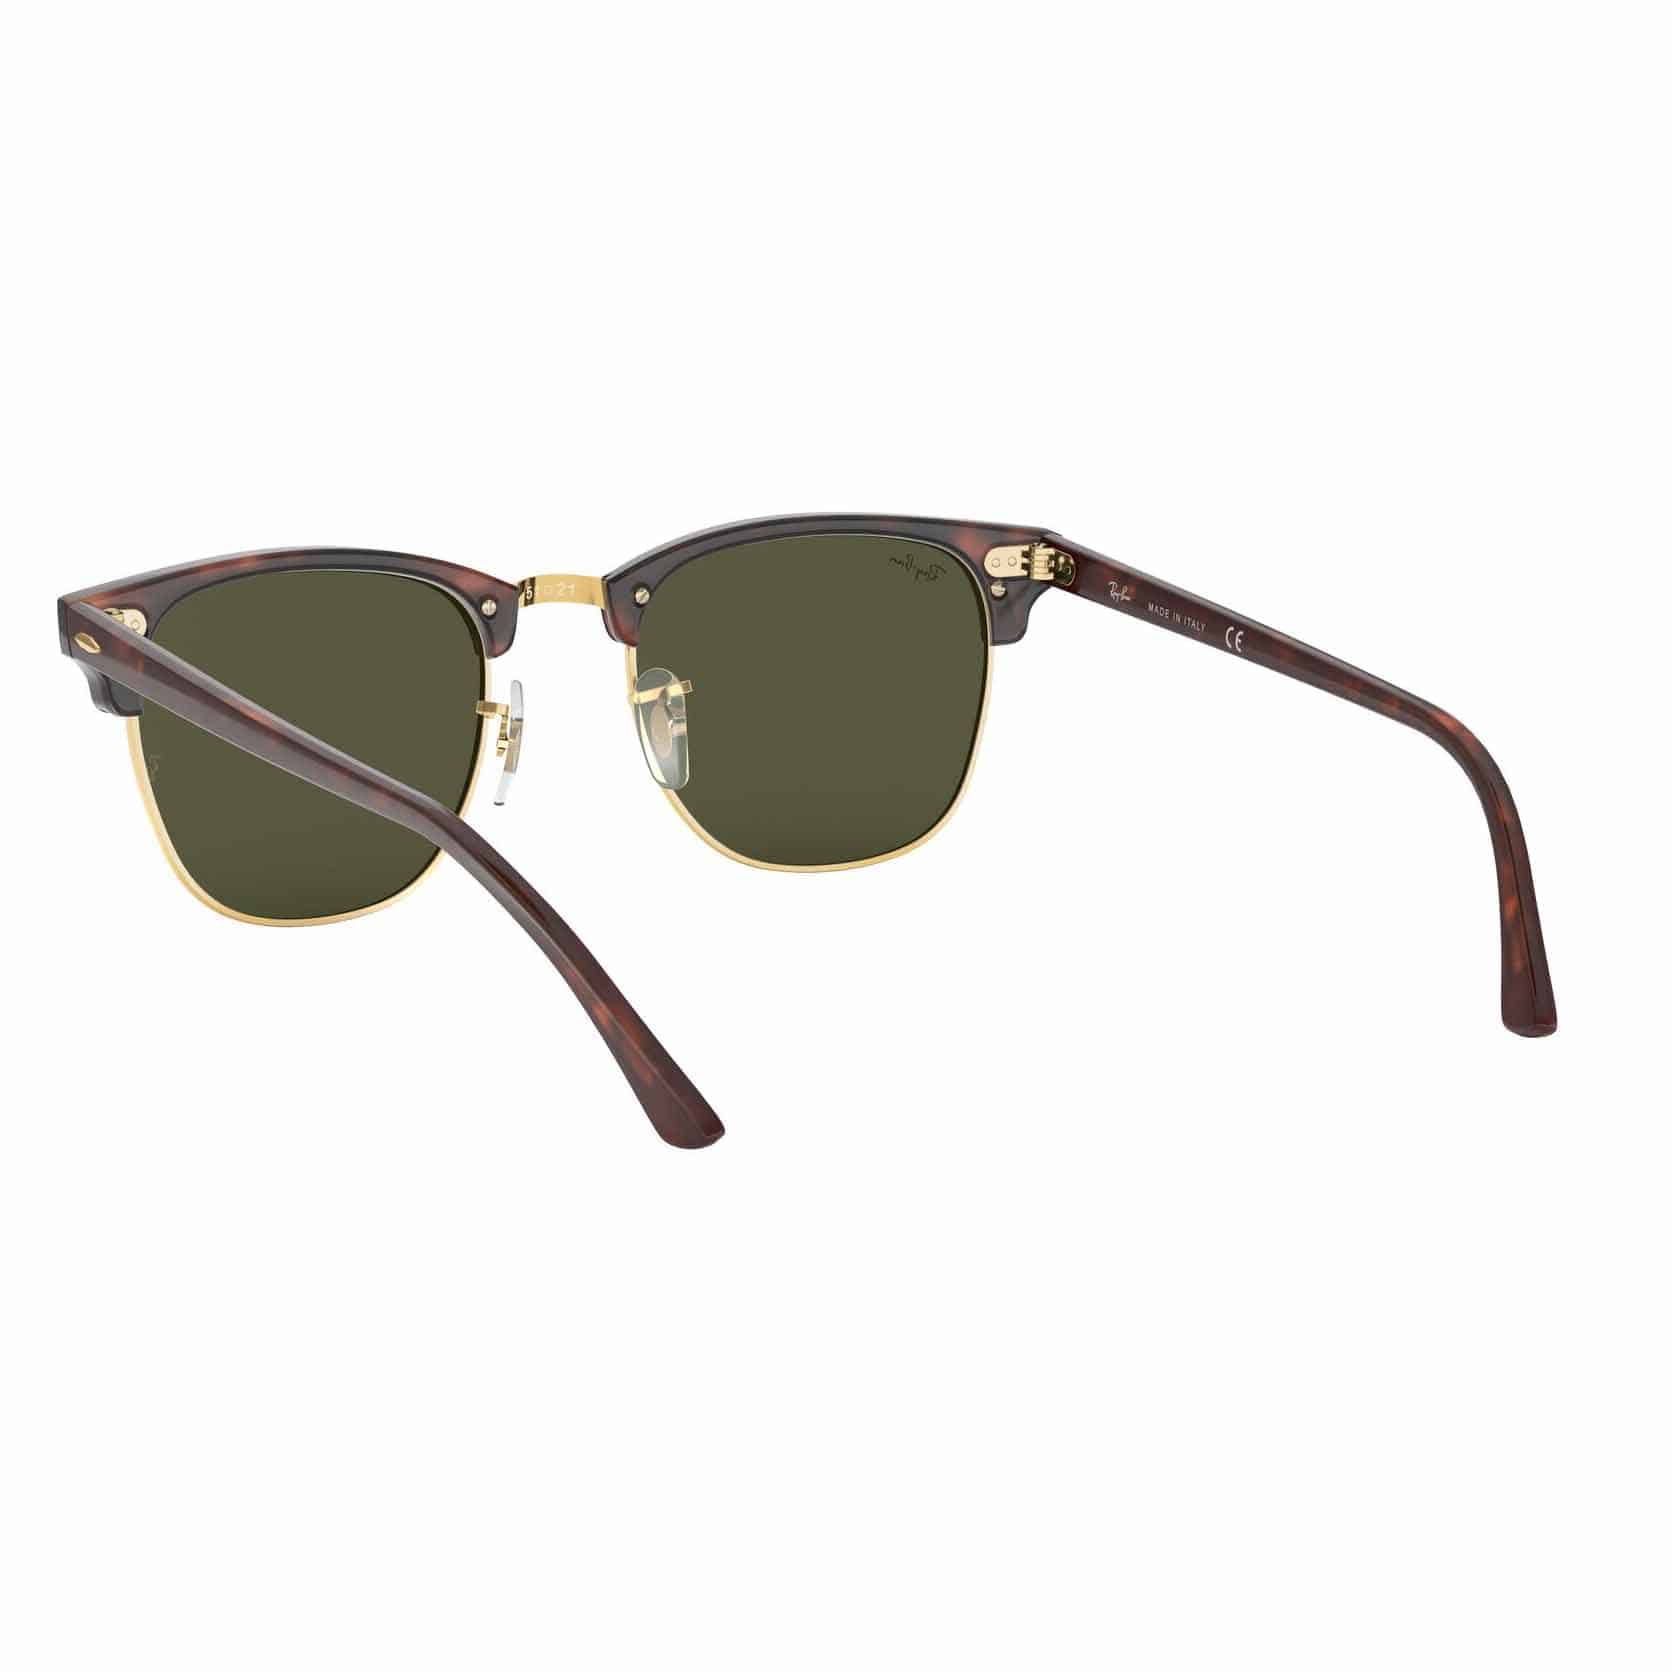 Co Ray-Ban TOX Sunglasses CLUBMASTER RB3016 W0366 51 MOCK TORTOISE ON ARISTA/G-15 GREEN